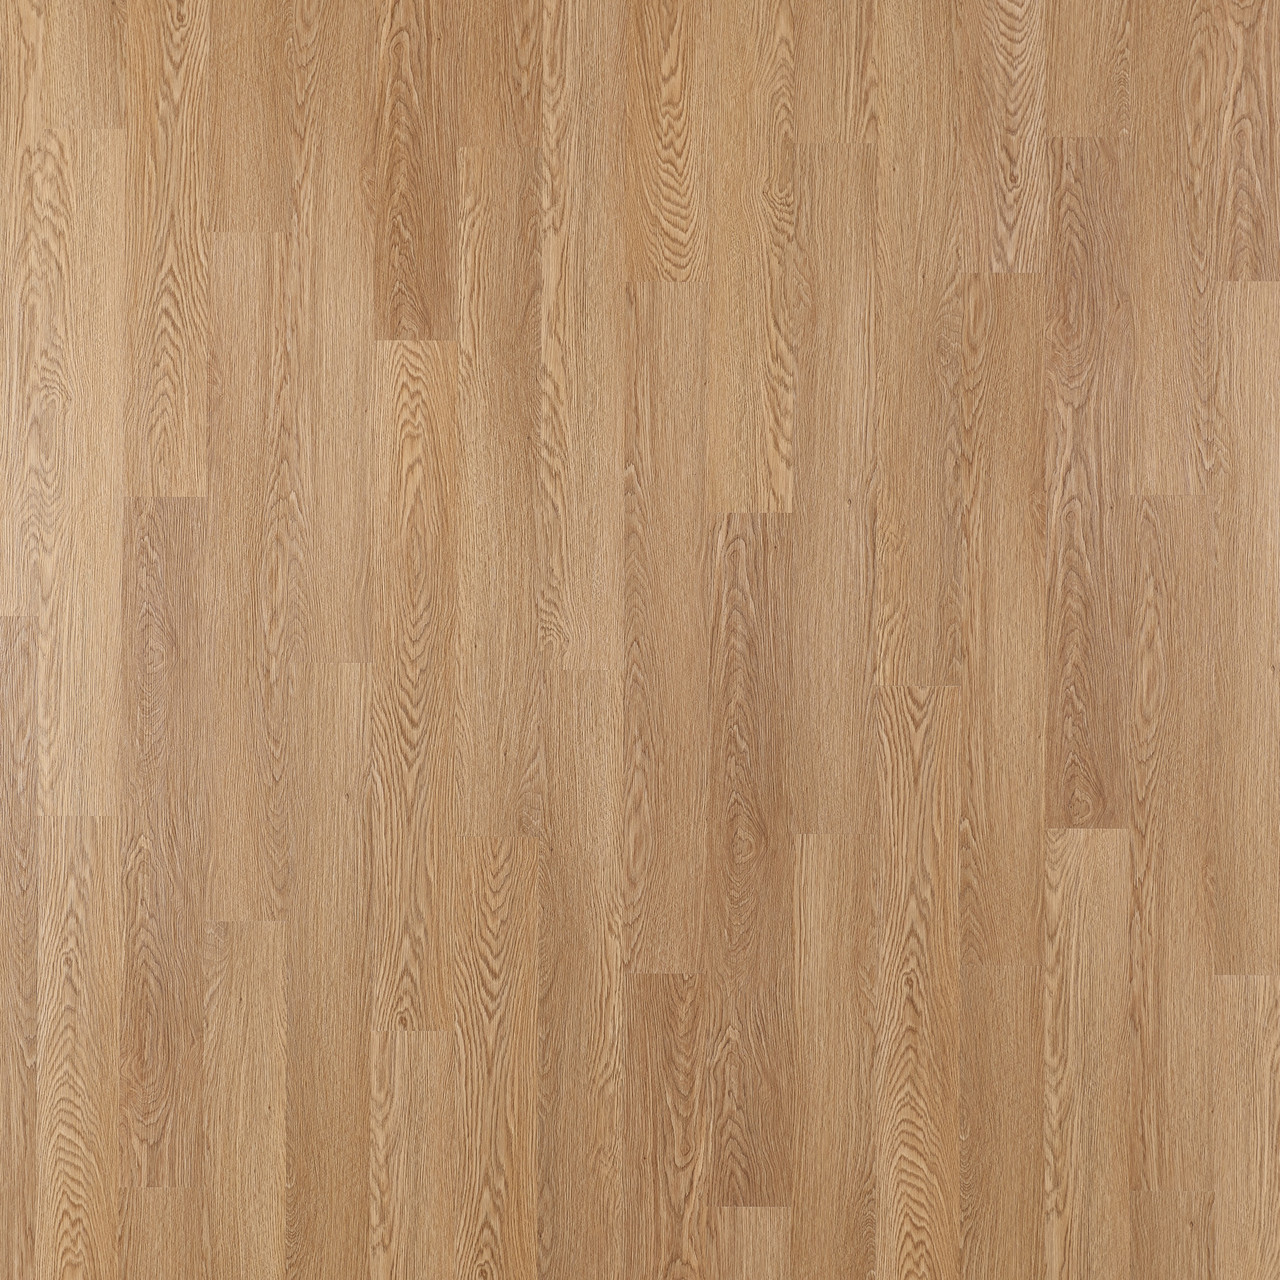 Adura Max Southern Oak Lvp Is Available At Georgia Carpet For